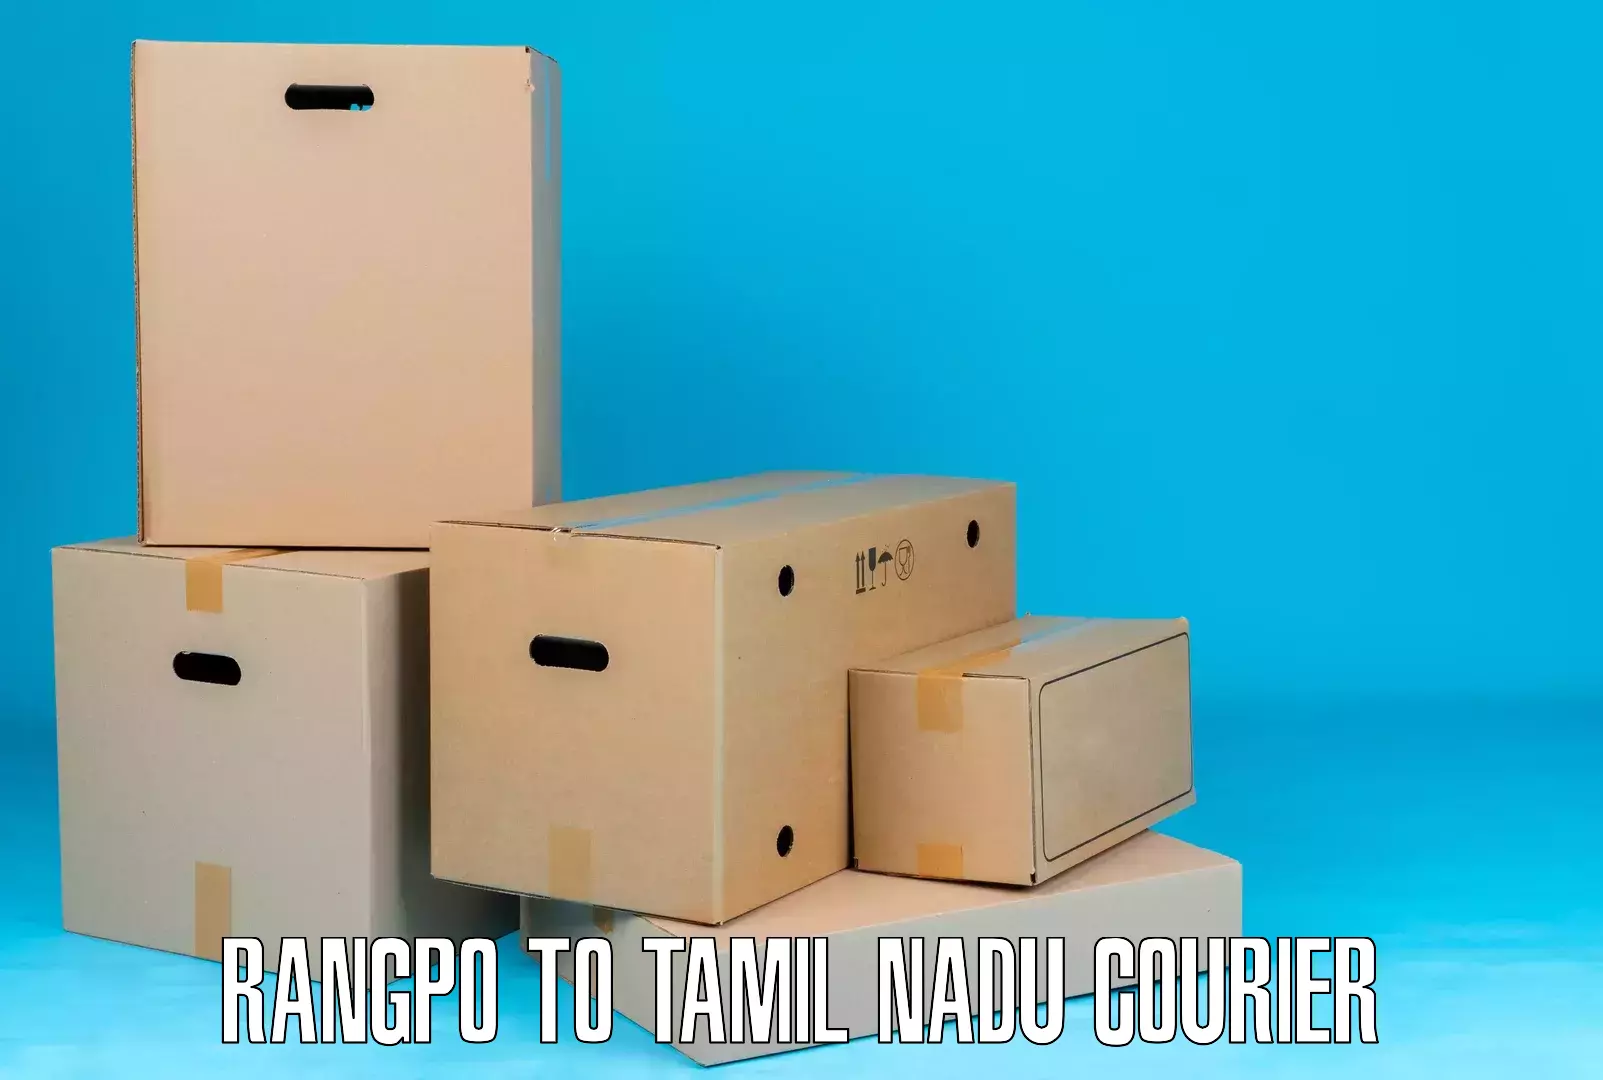 Same-day delivery solutions Rangpo to Tamil Nadu